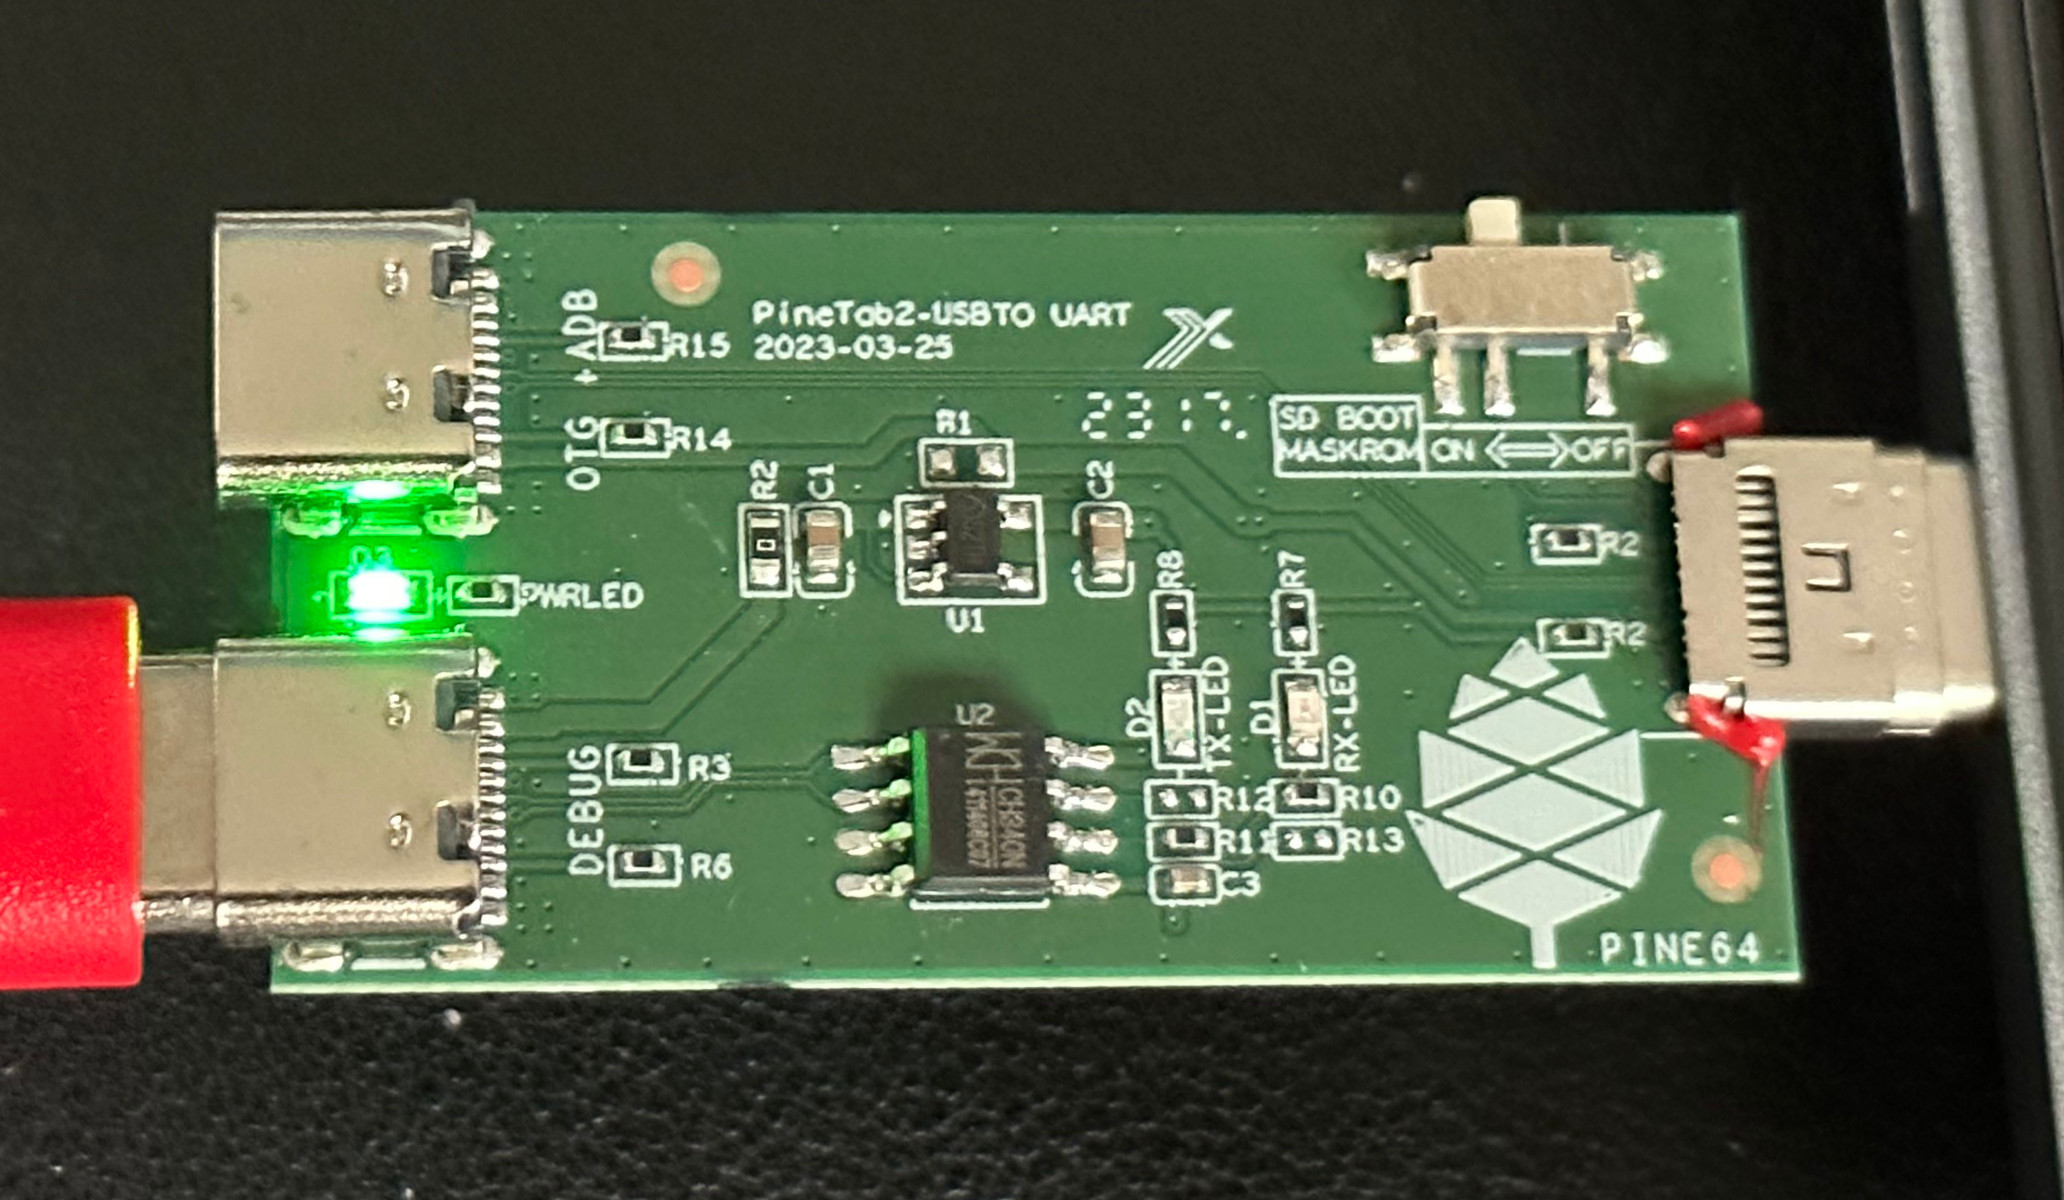 The UART adapter